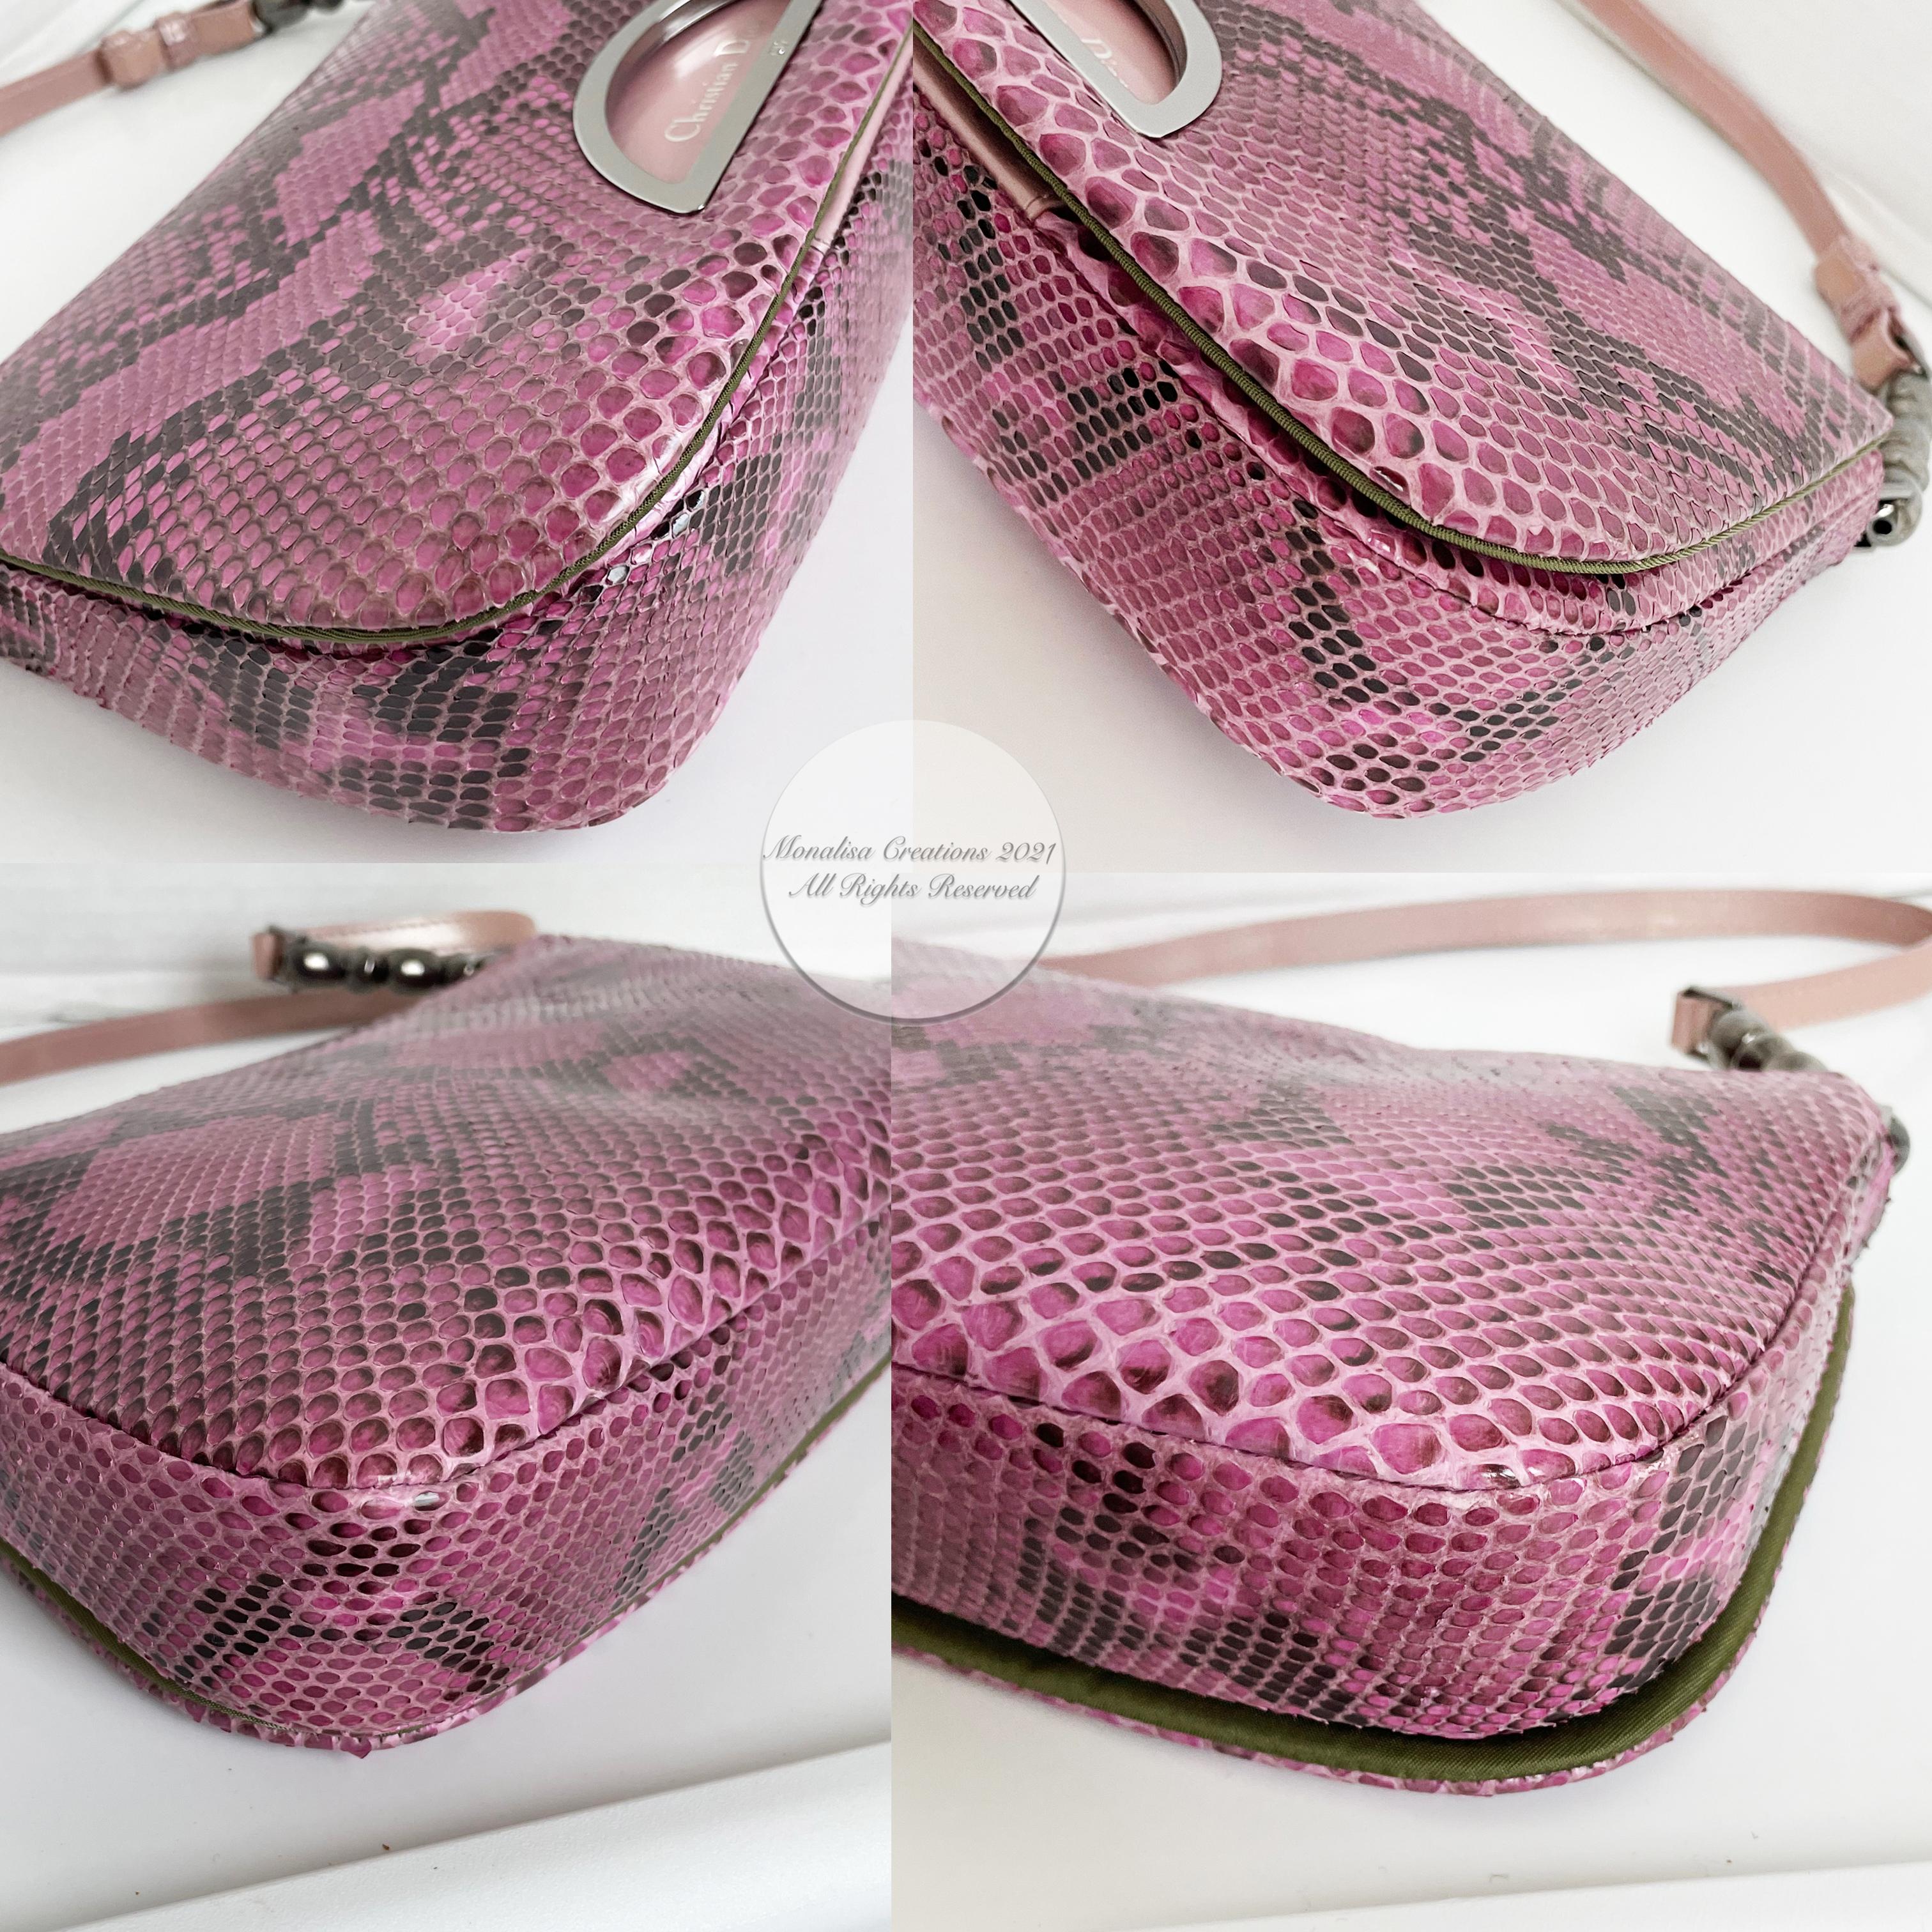 Christian Dior Malice Flap Bag Pink Python Exotic Snakeskin Leather with COA 2